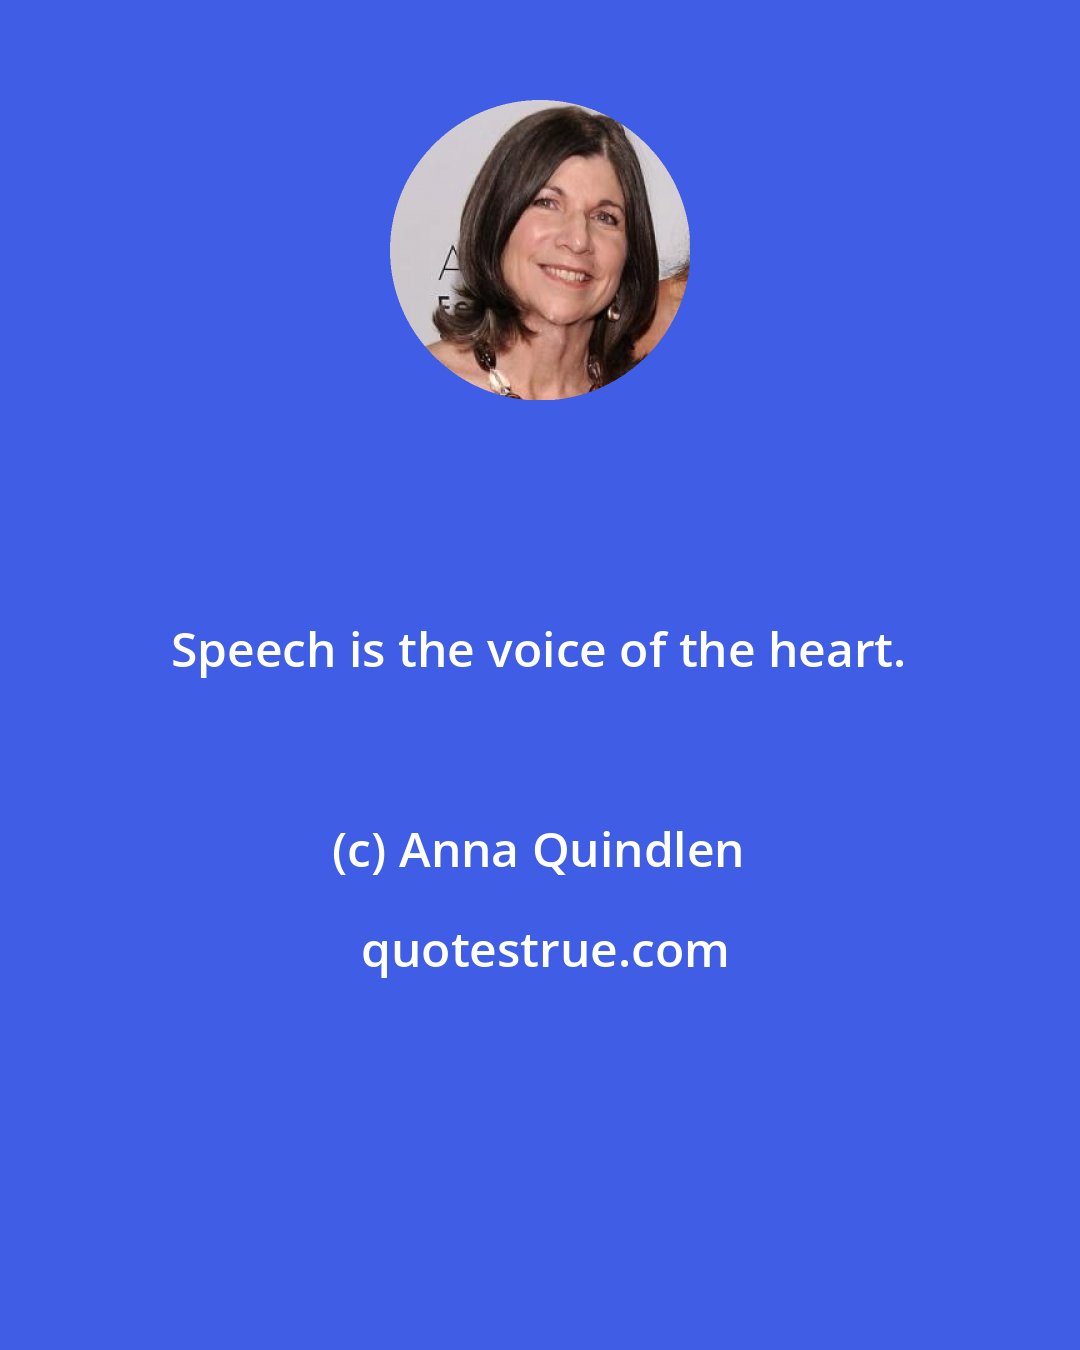 Anna Quindlen: Speech is the voice of the heart.